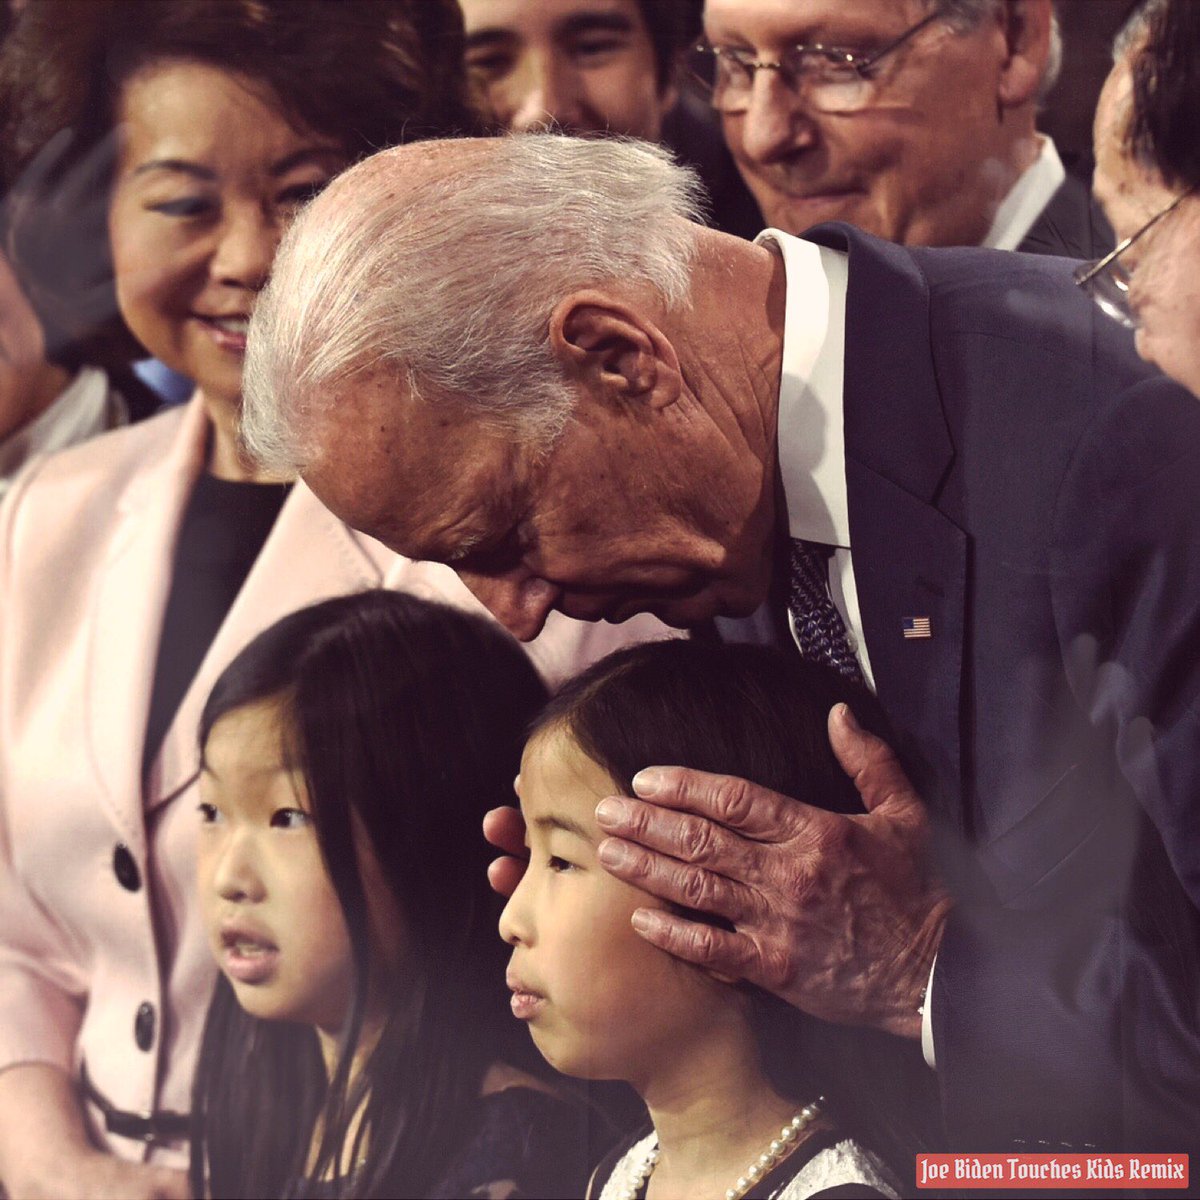 Joe Biden touches kids that’s a big no no 😬 The hit song about our president’s social distancing issues HAS A REMIX! 🚨 Joe Biden Touches Kids Remix (feat. @sirhottest) IS OUT NOW 🔥 Spotify: tinyurl.com/tb7smn8e Amazon: tinyurl.com/63pwbtab Apple: won’t release it 🤔